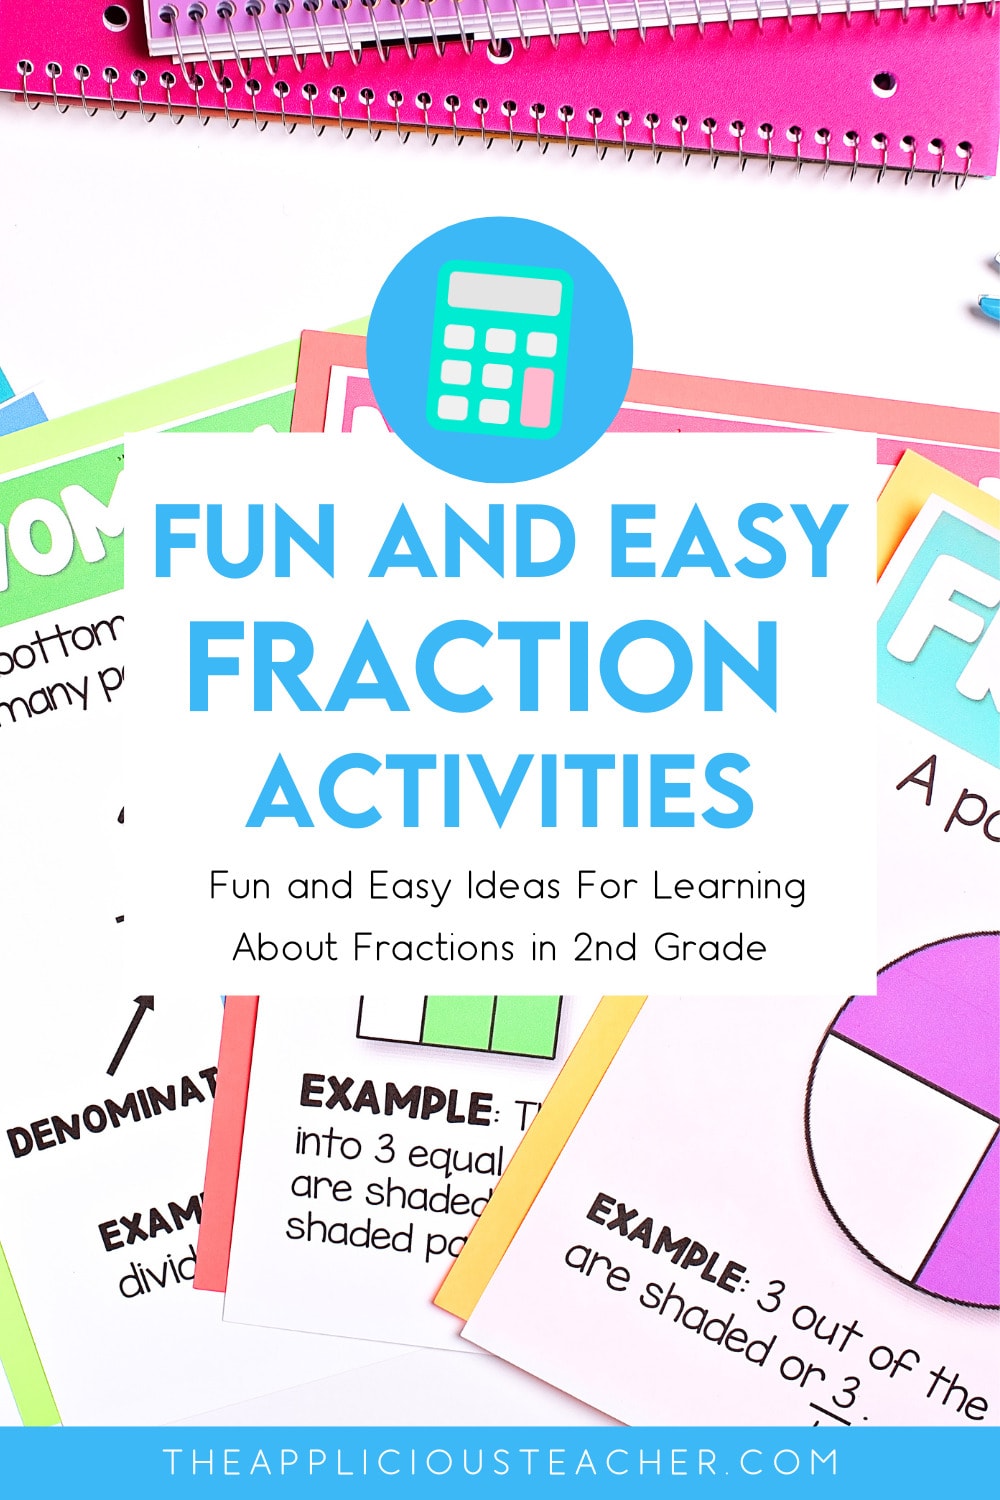 hands on fraction activities for 2nd grade